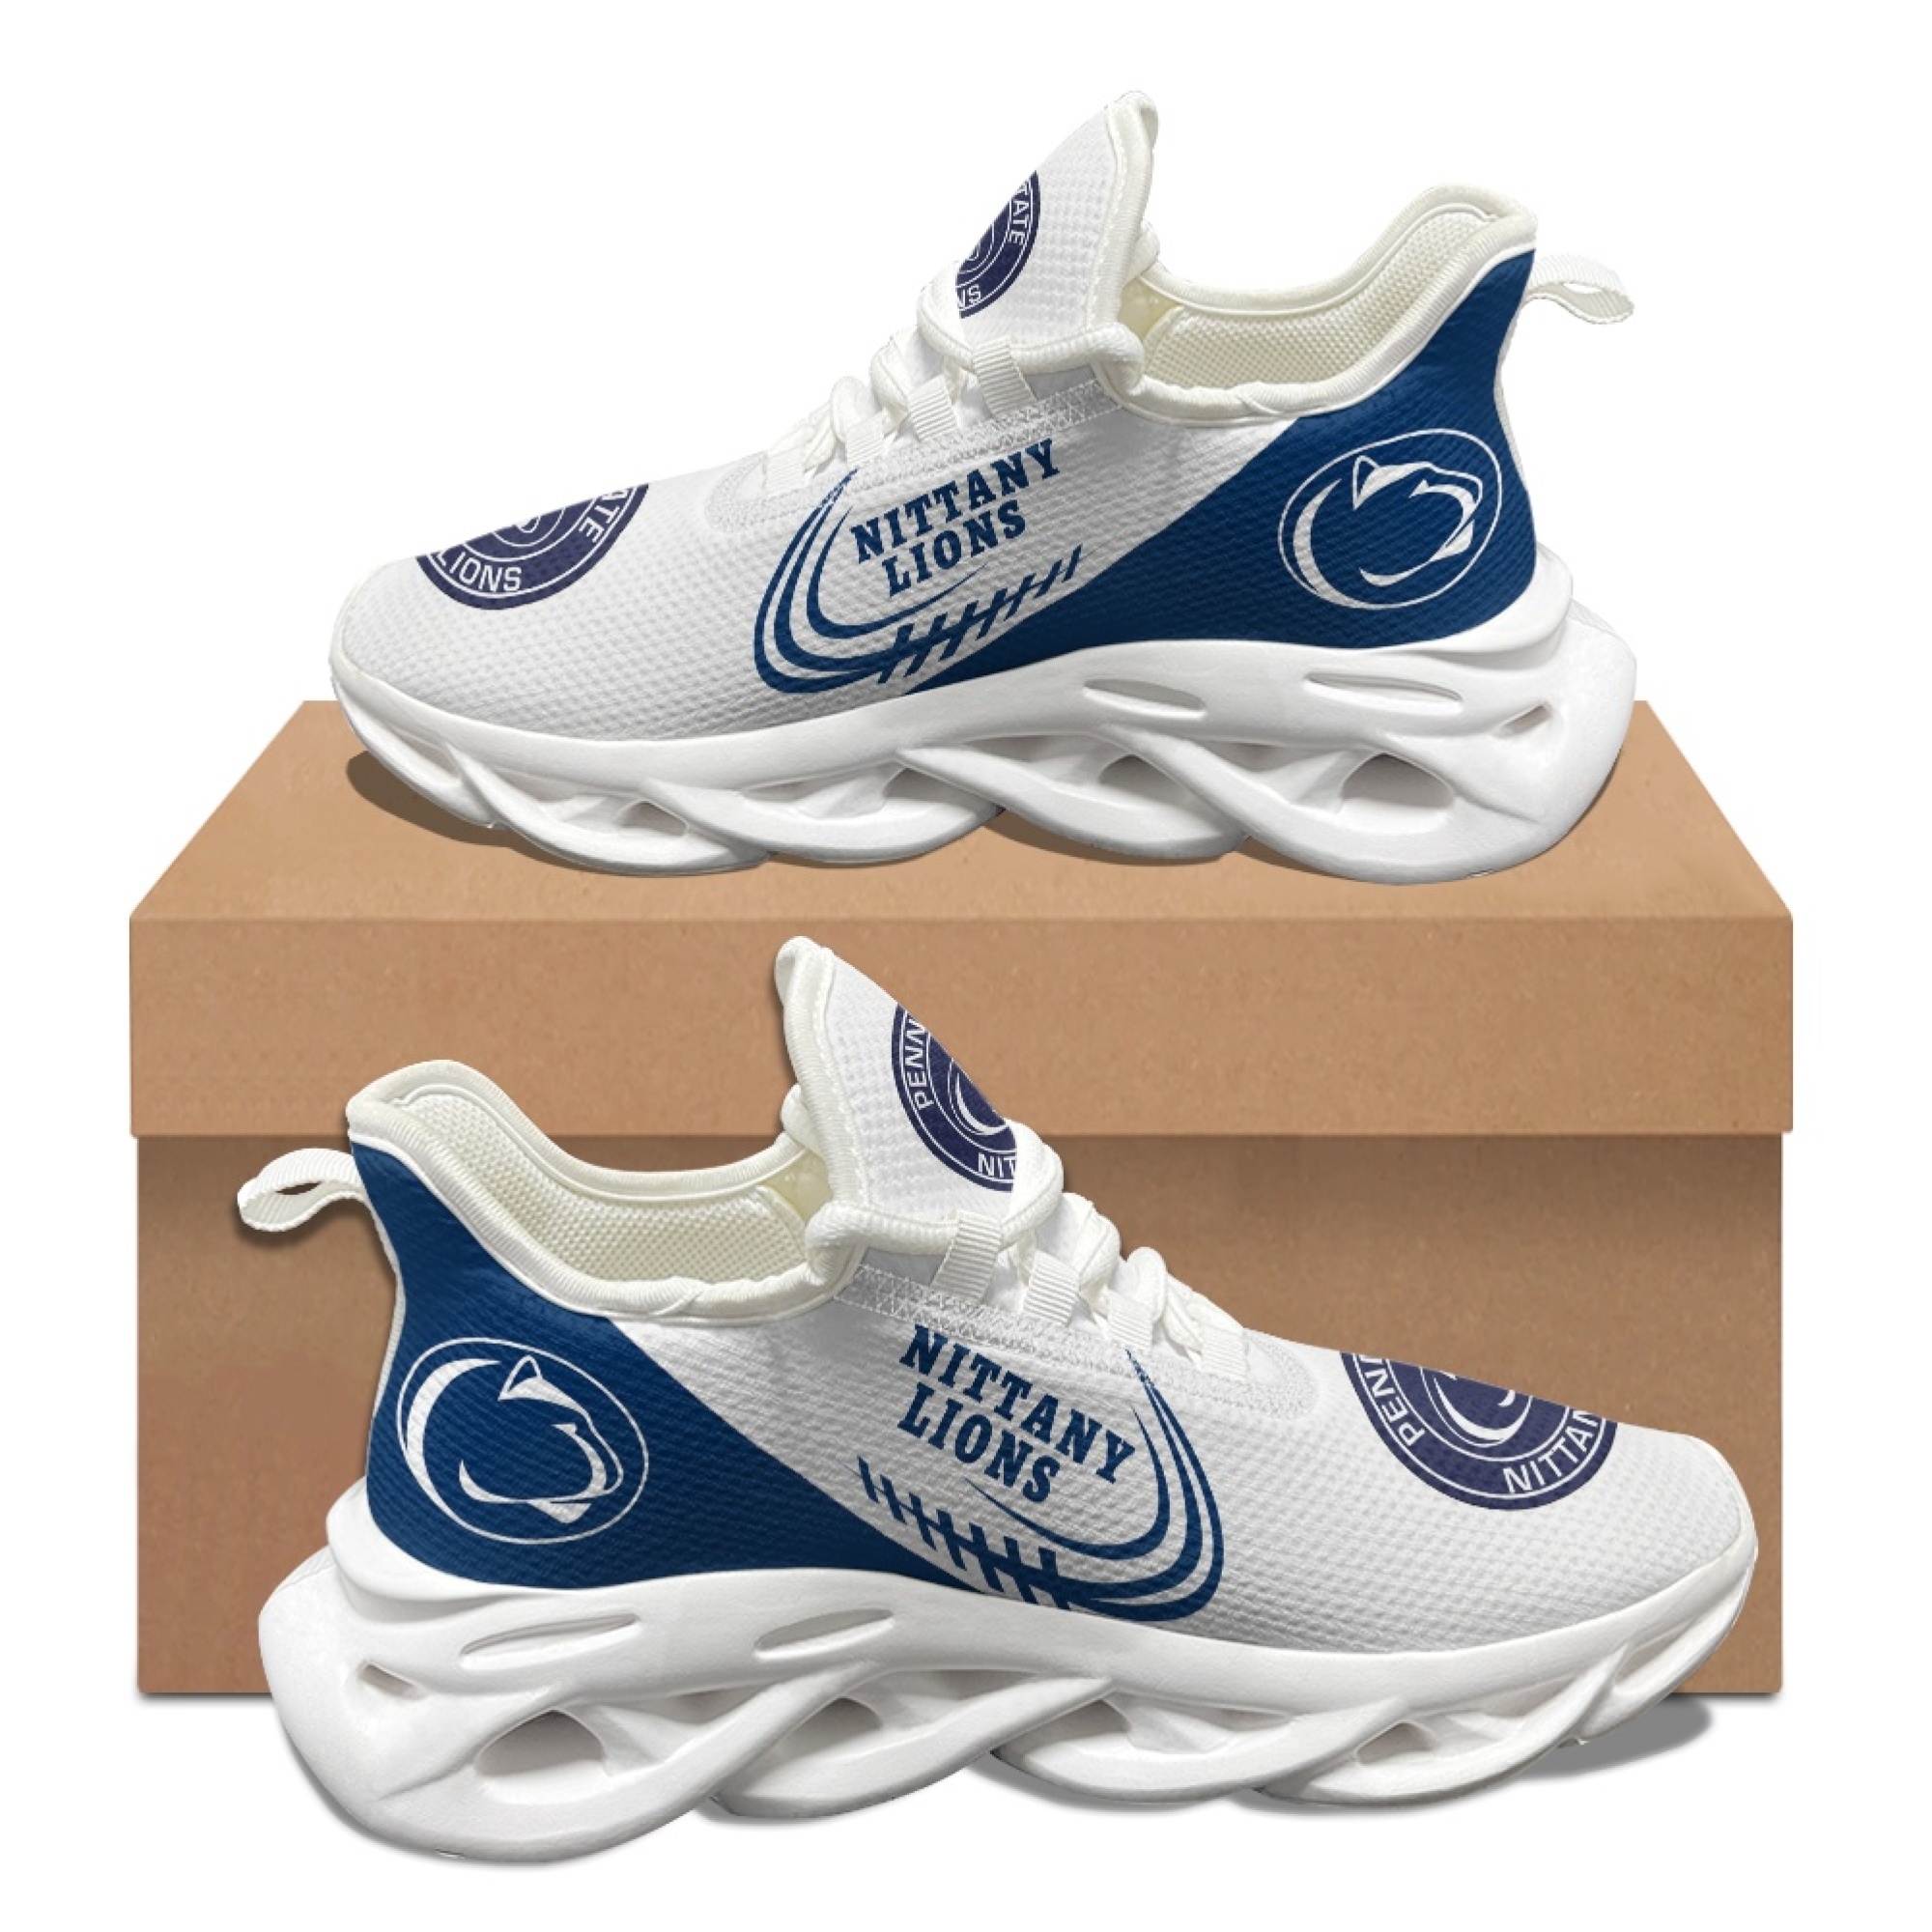 Women's Penn State Nittany Lions Flex Control Sneakers 002